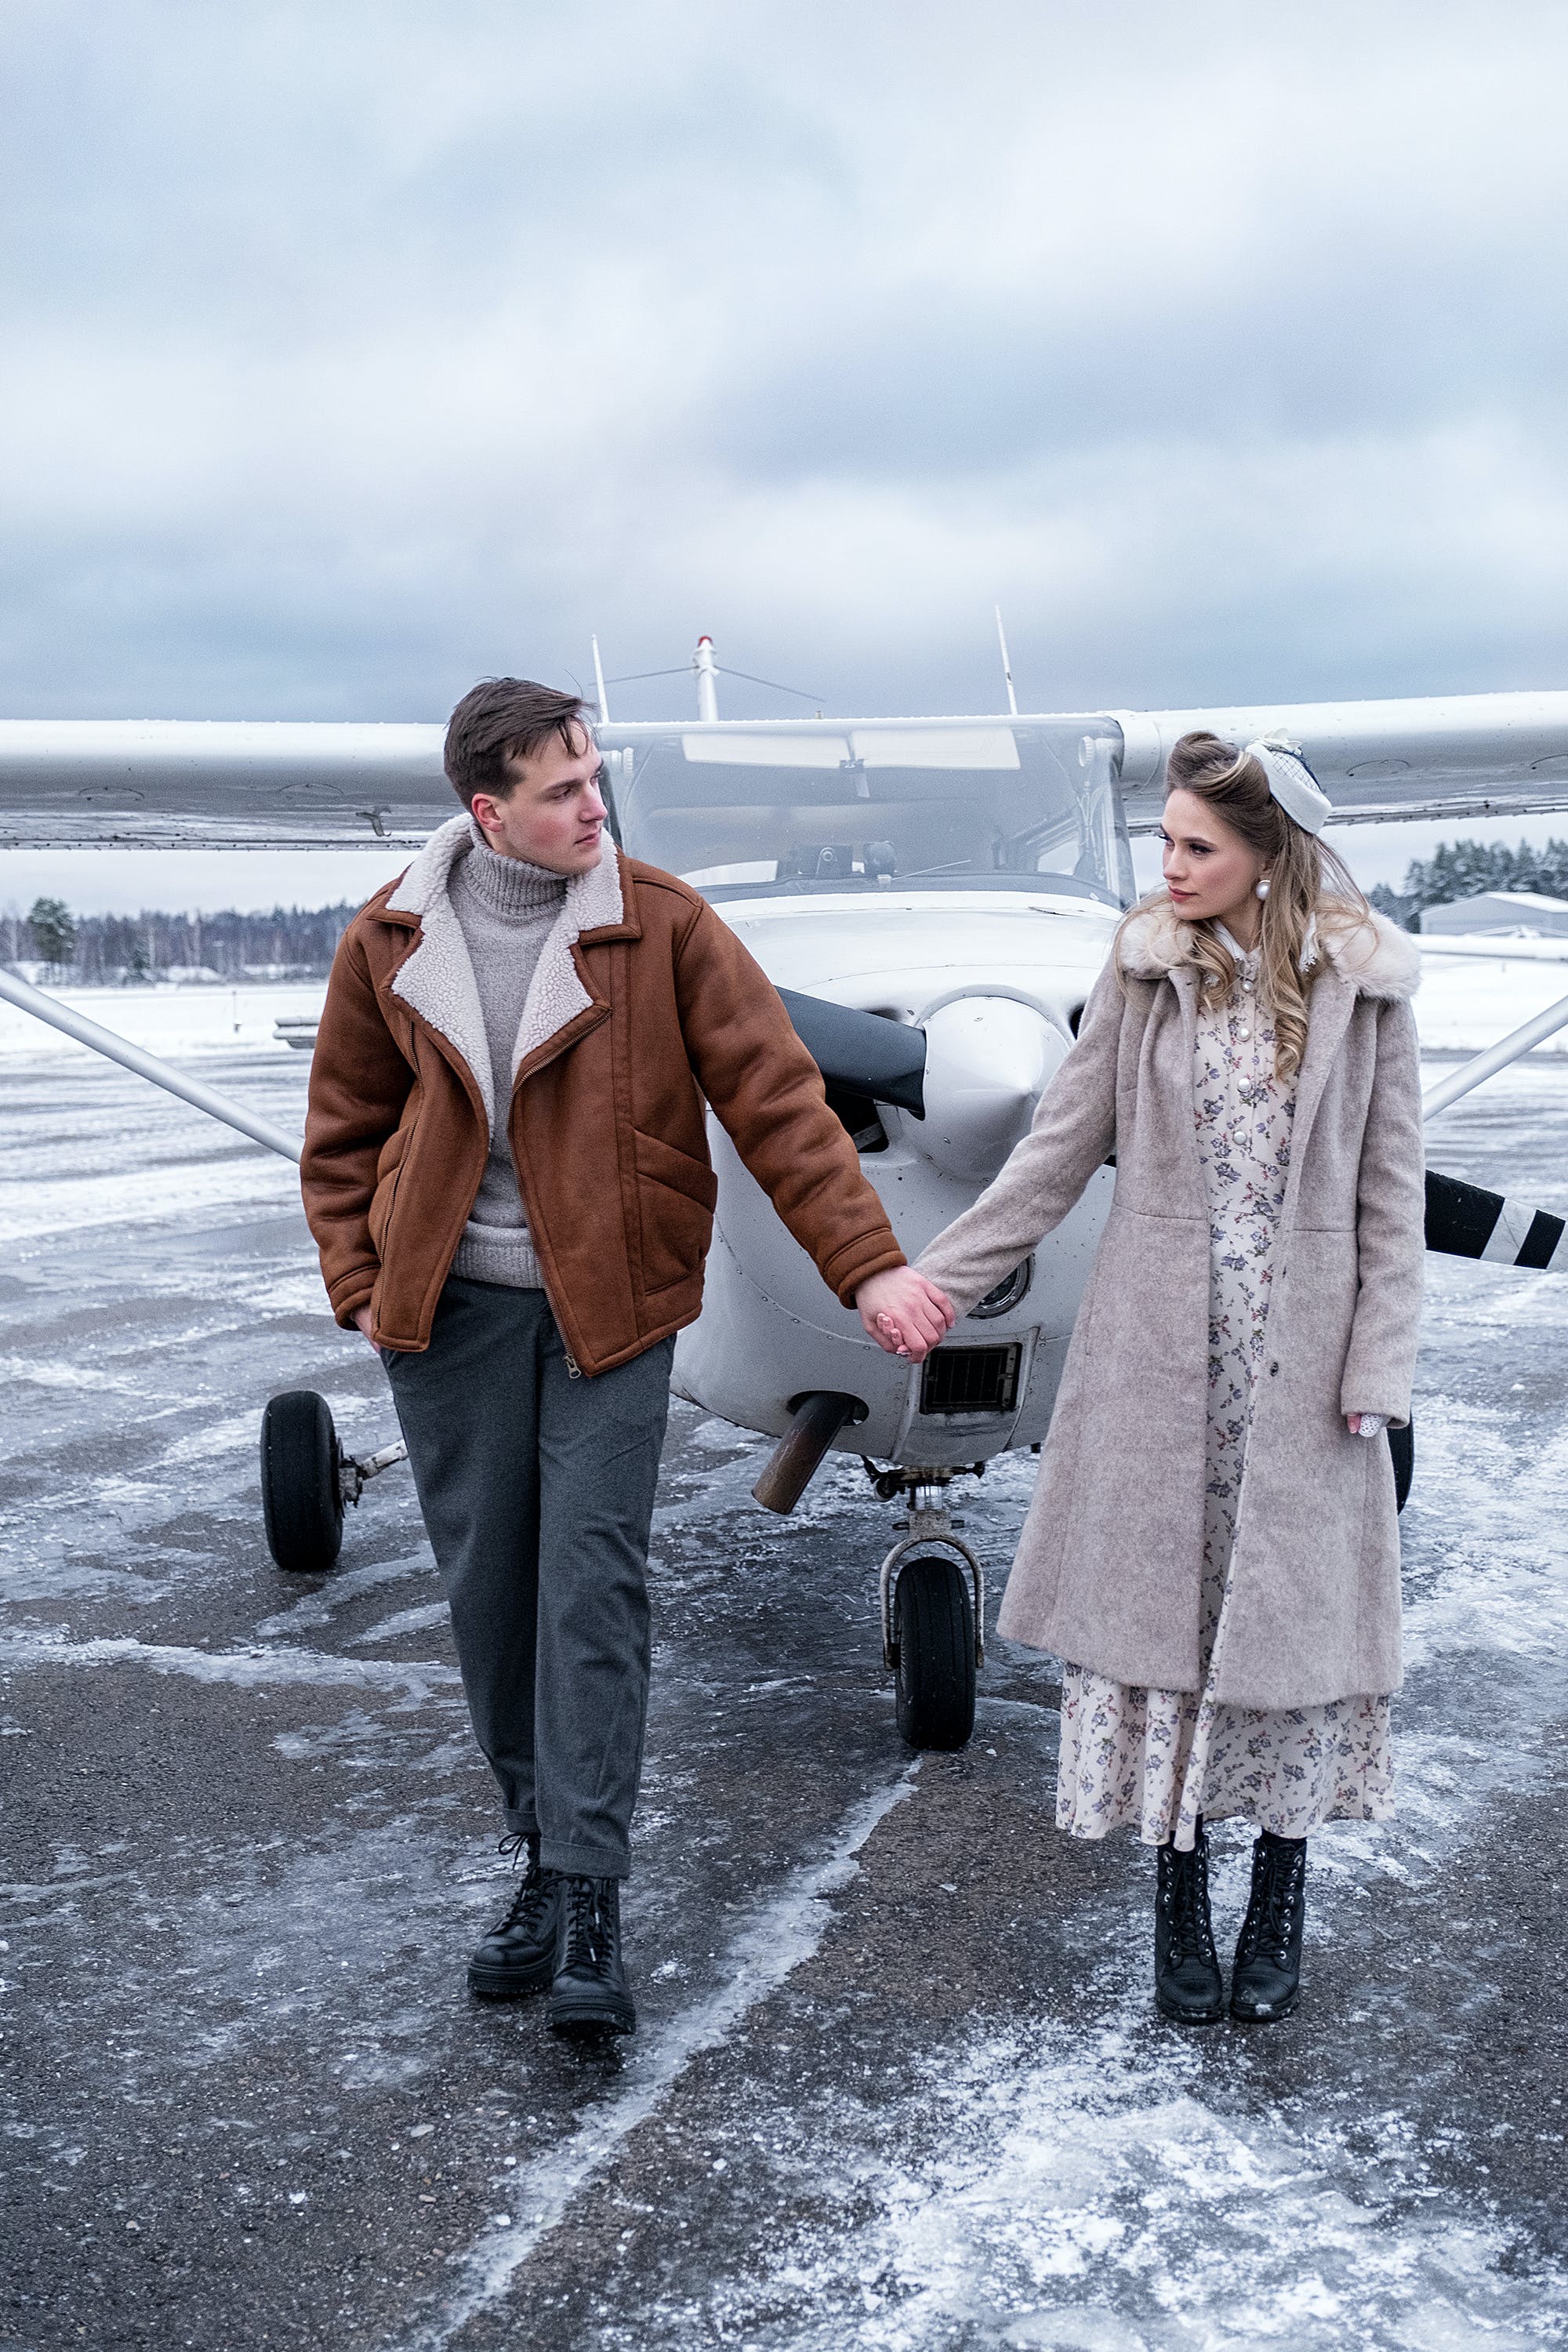 A young couple holding hands at an airfield | Source: Pexels